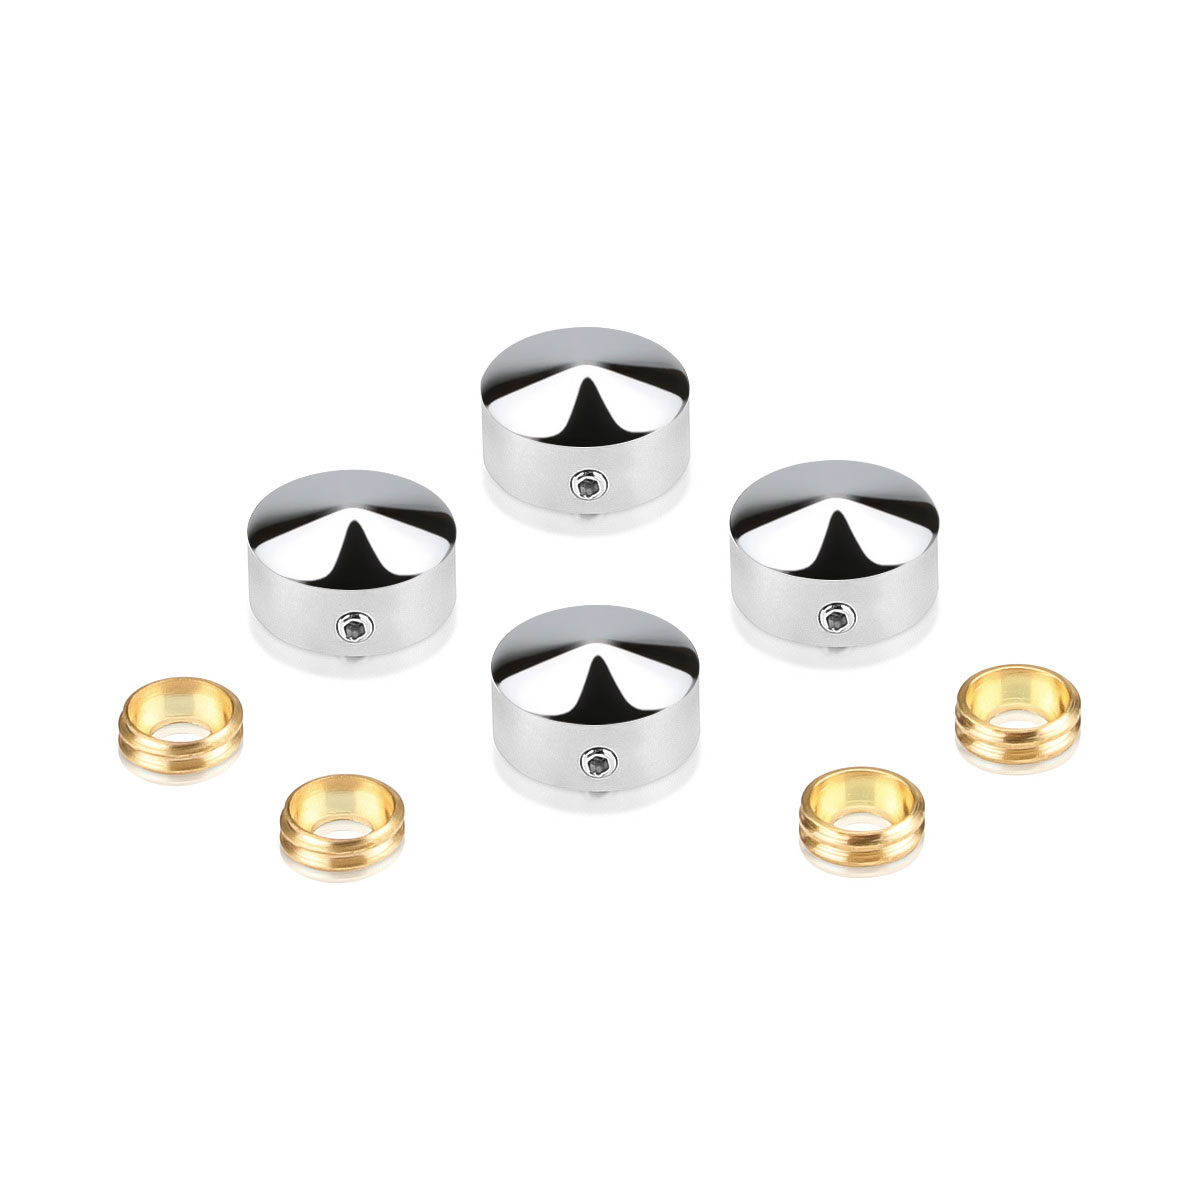 Set of 4 Conical Locking Screw Cover Diameter 5/8'', Polished Stainless Steel Finish (Indoor Use Only)